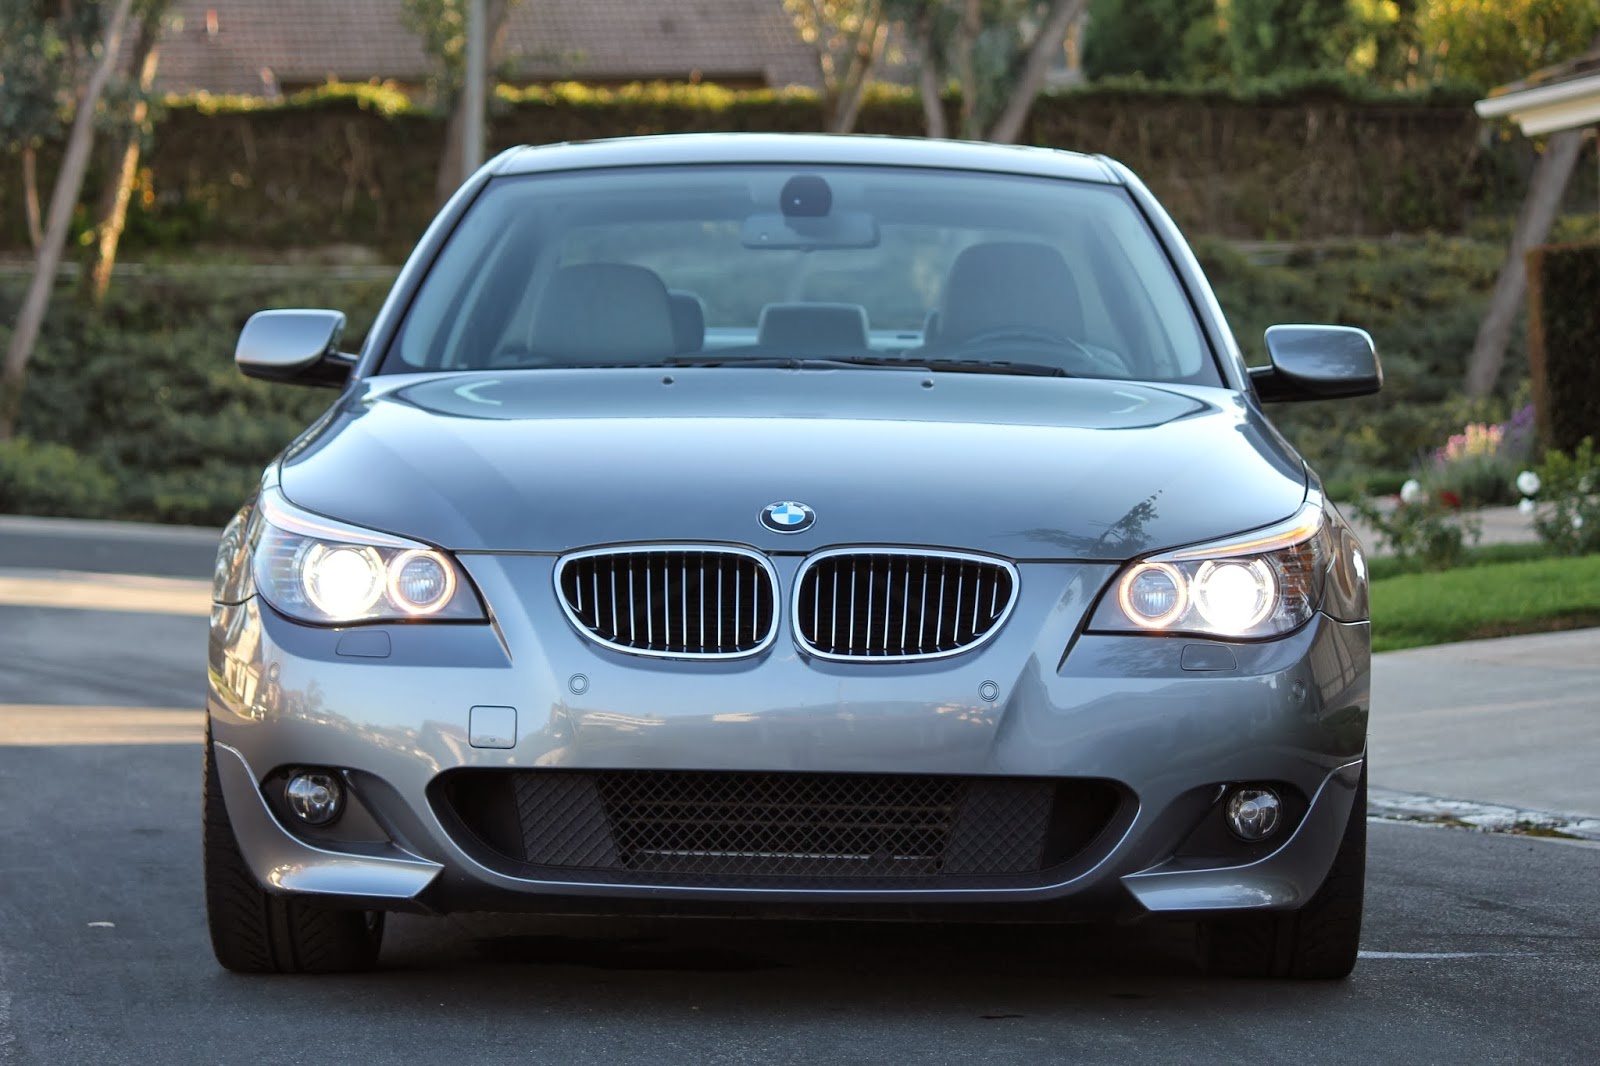 2008 Bmw 550i video review #5